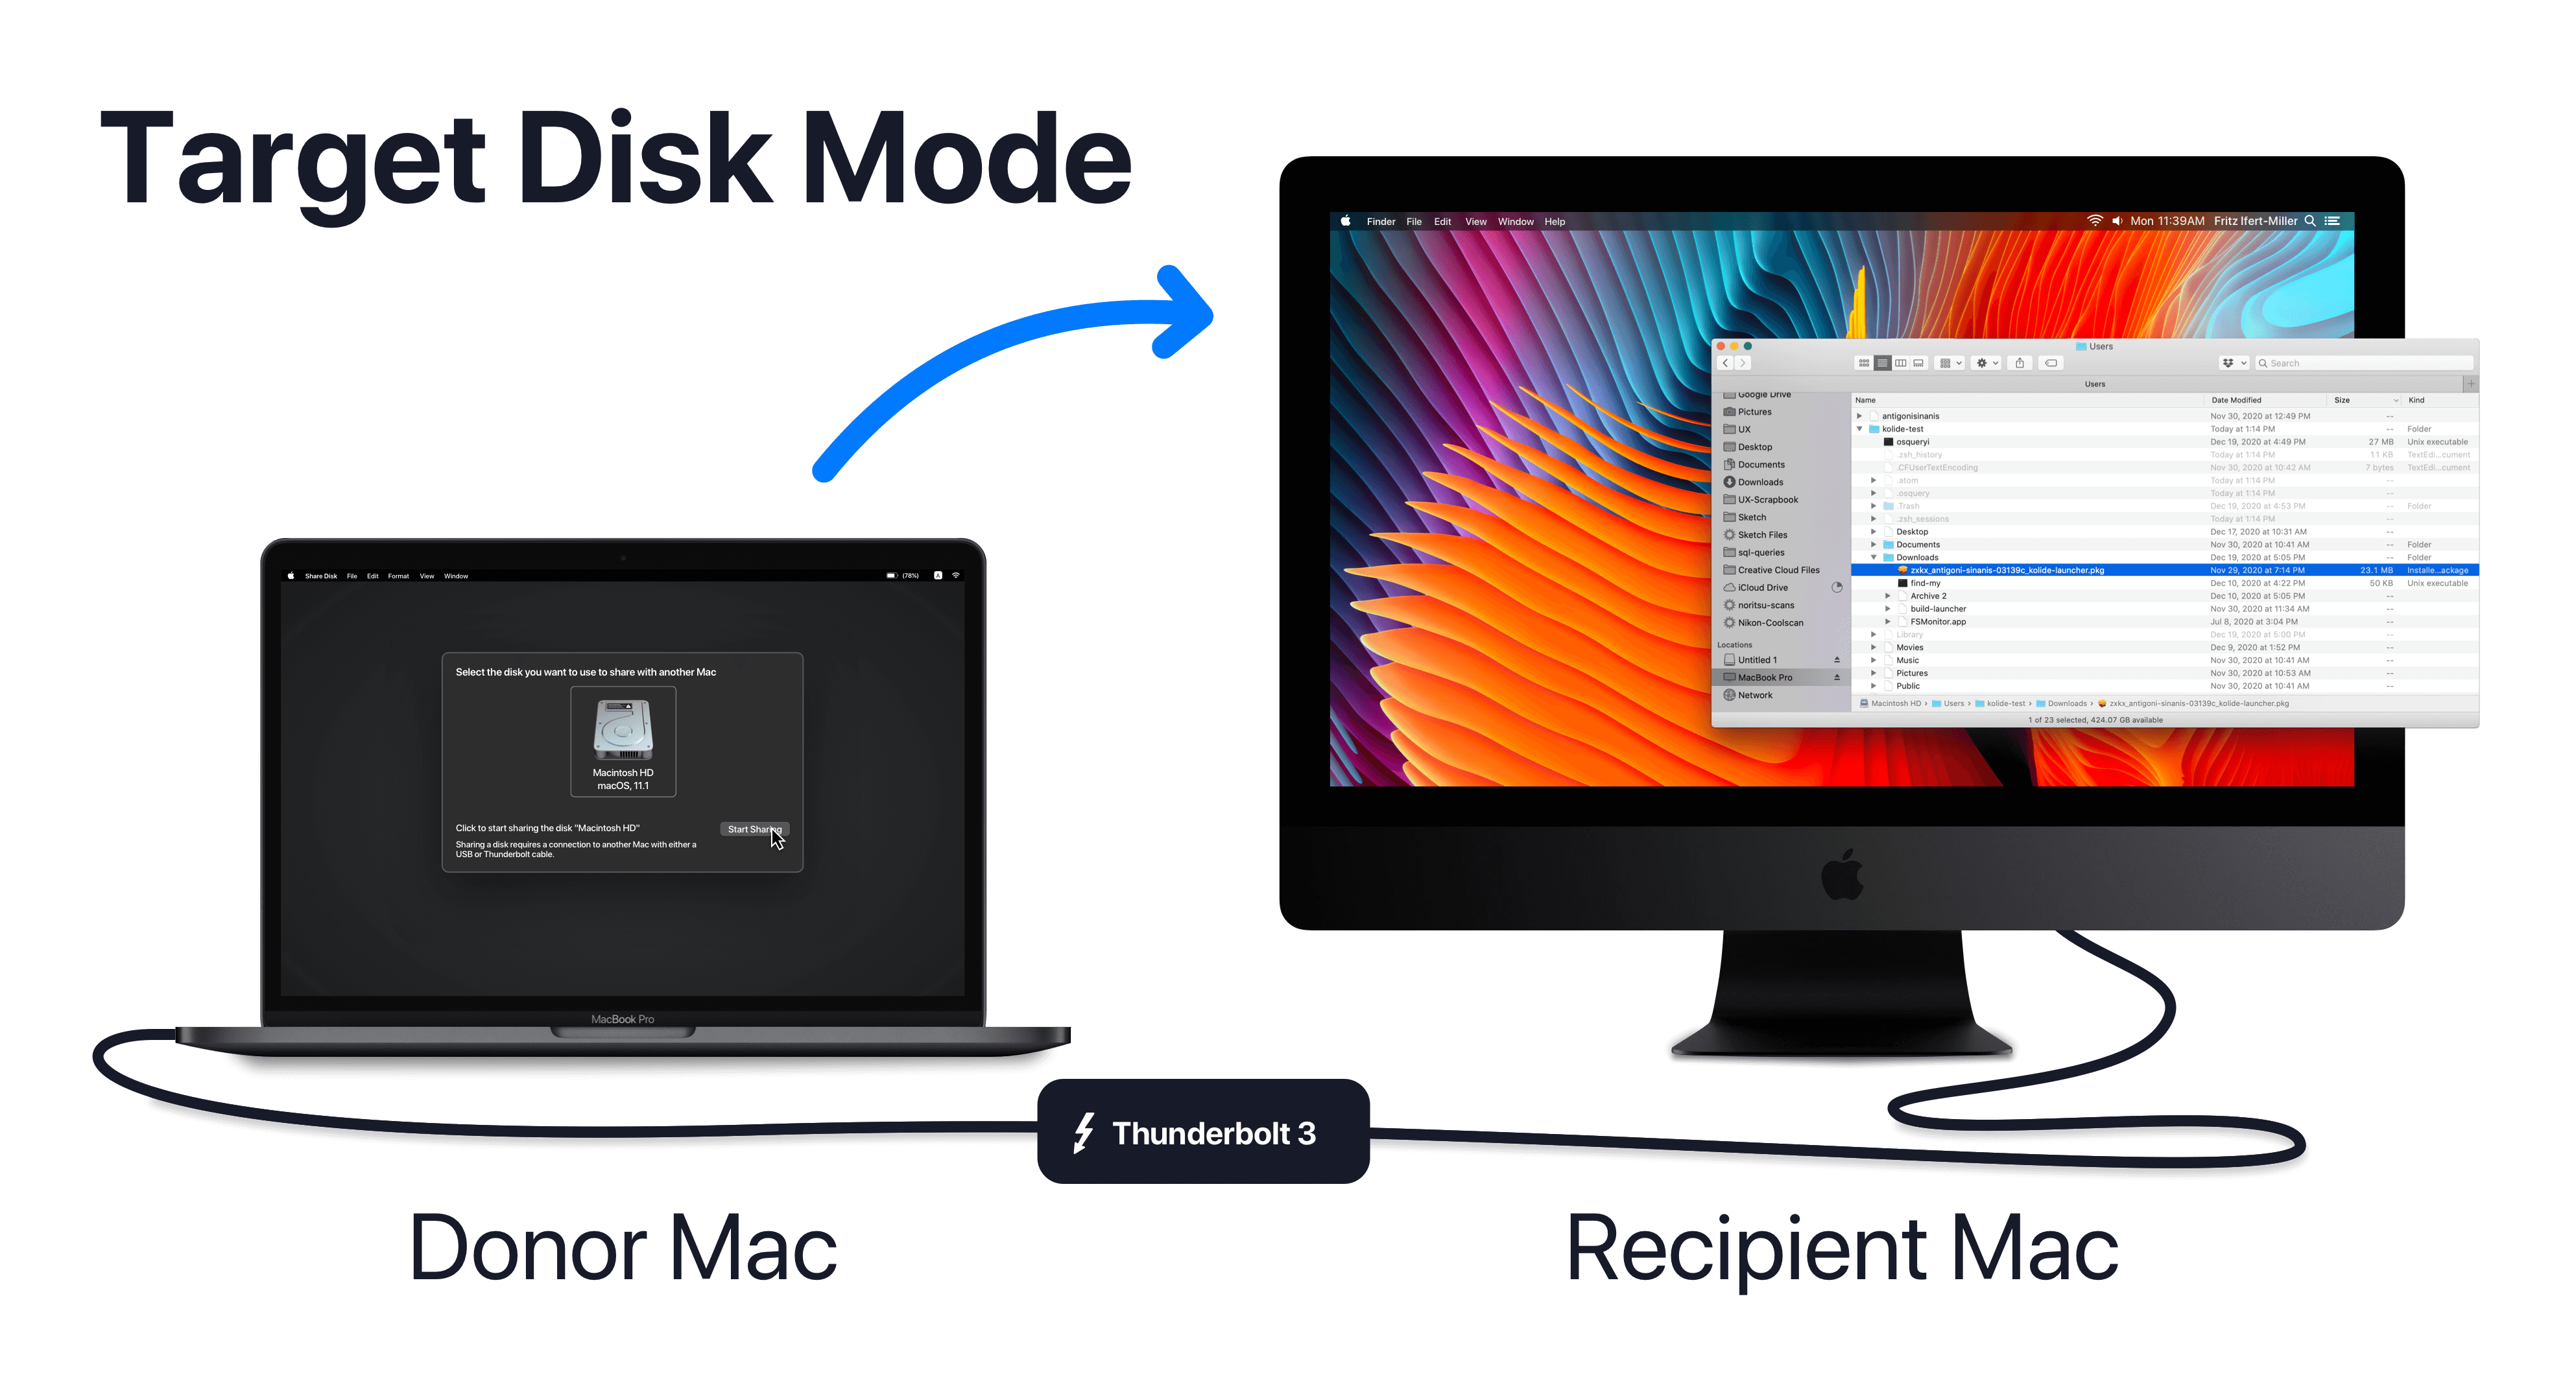 A illustrated diagram showing a Macbook connected to an iMac via Thunderbolt 3 cord. The Macbook is the "donor mac" and has the target disk mode dialog on its screen. The iMac is the "recipient Mac" and has Finder open